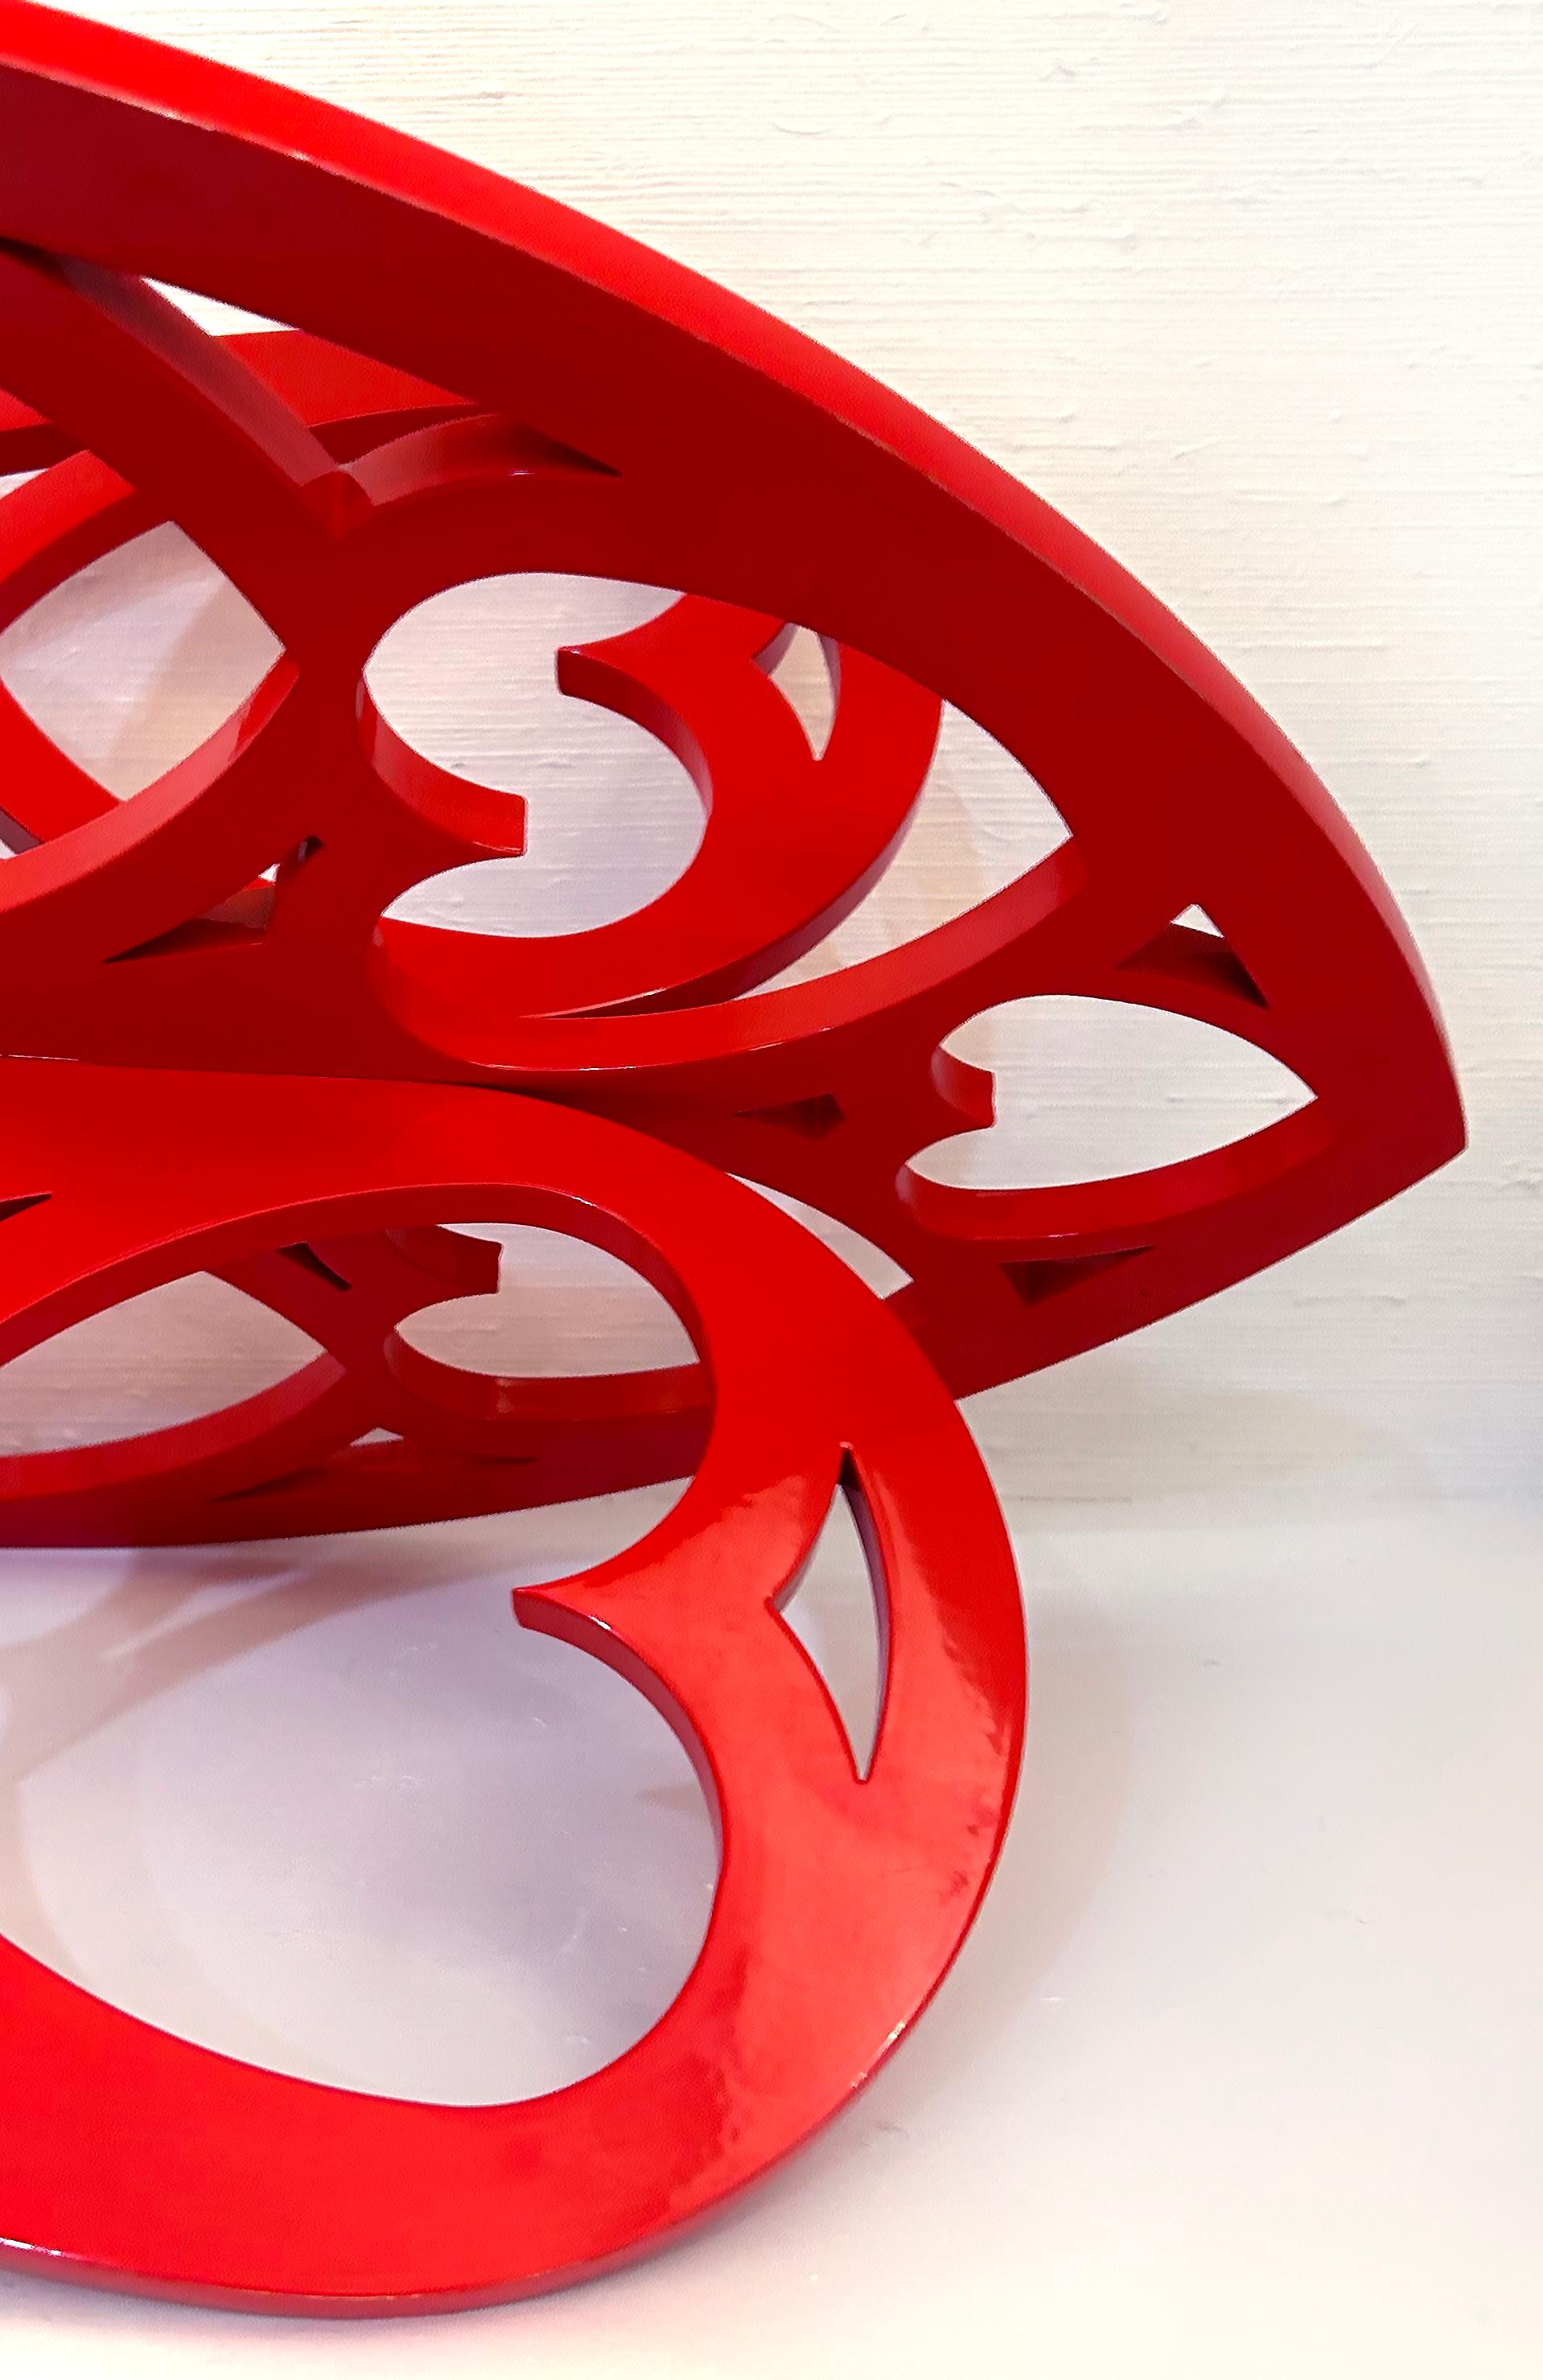 Contemporary Interlocking Hearts Powder-coated Aluminum Lace Sculpture by Michael Gitter